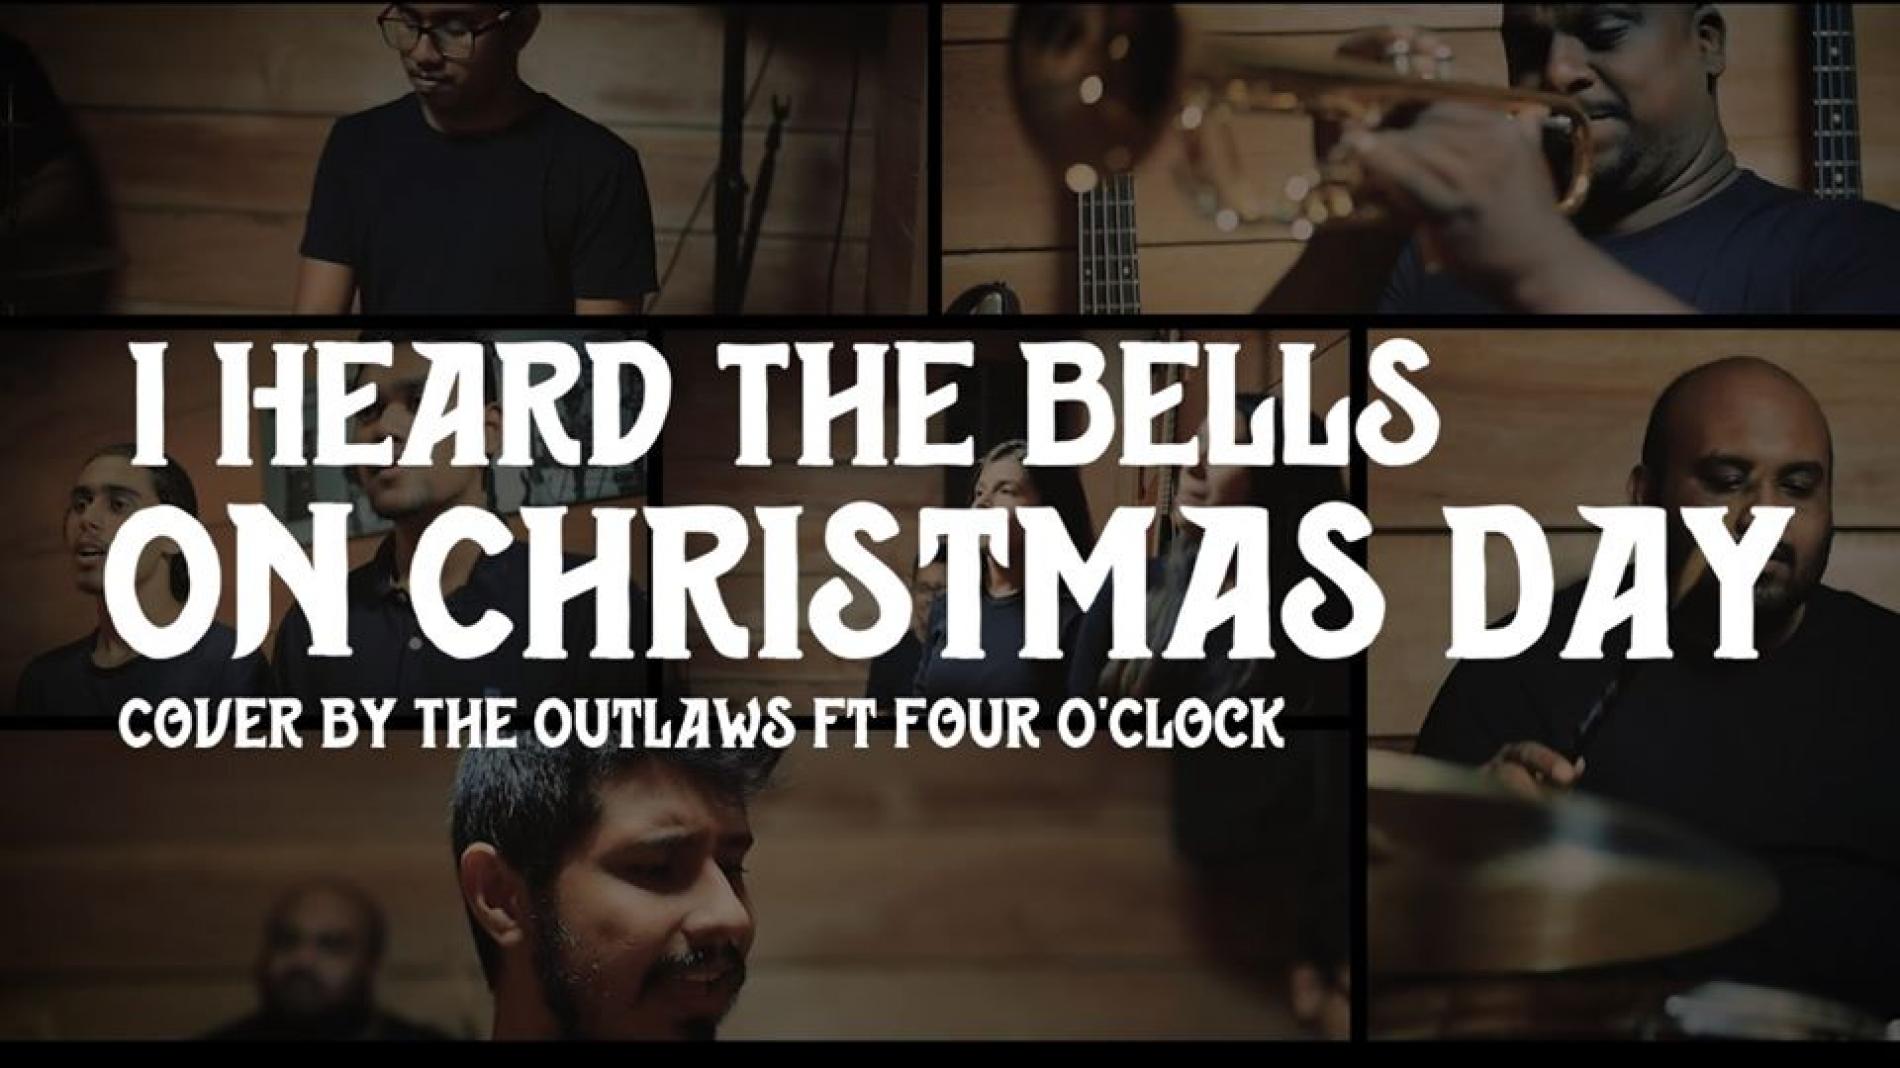 I Heard The Bells on Christmas Day Cover By The Outlaws Ft Four O’Clock